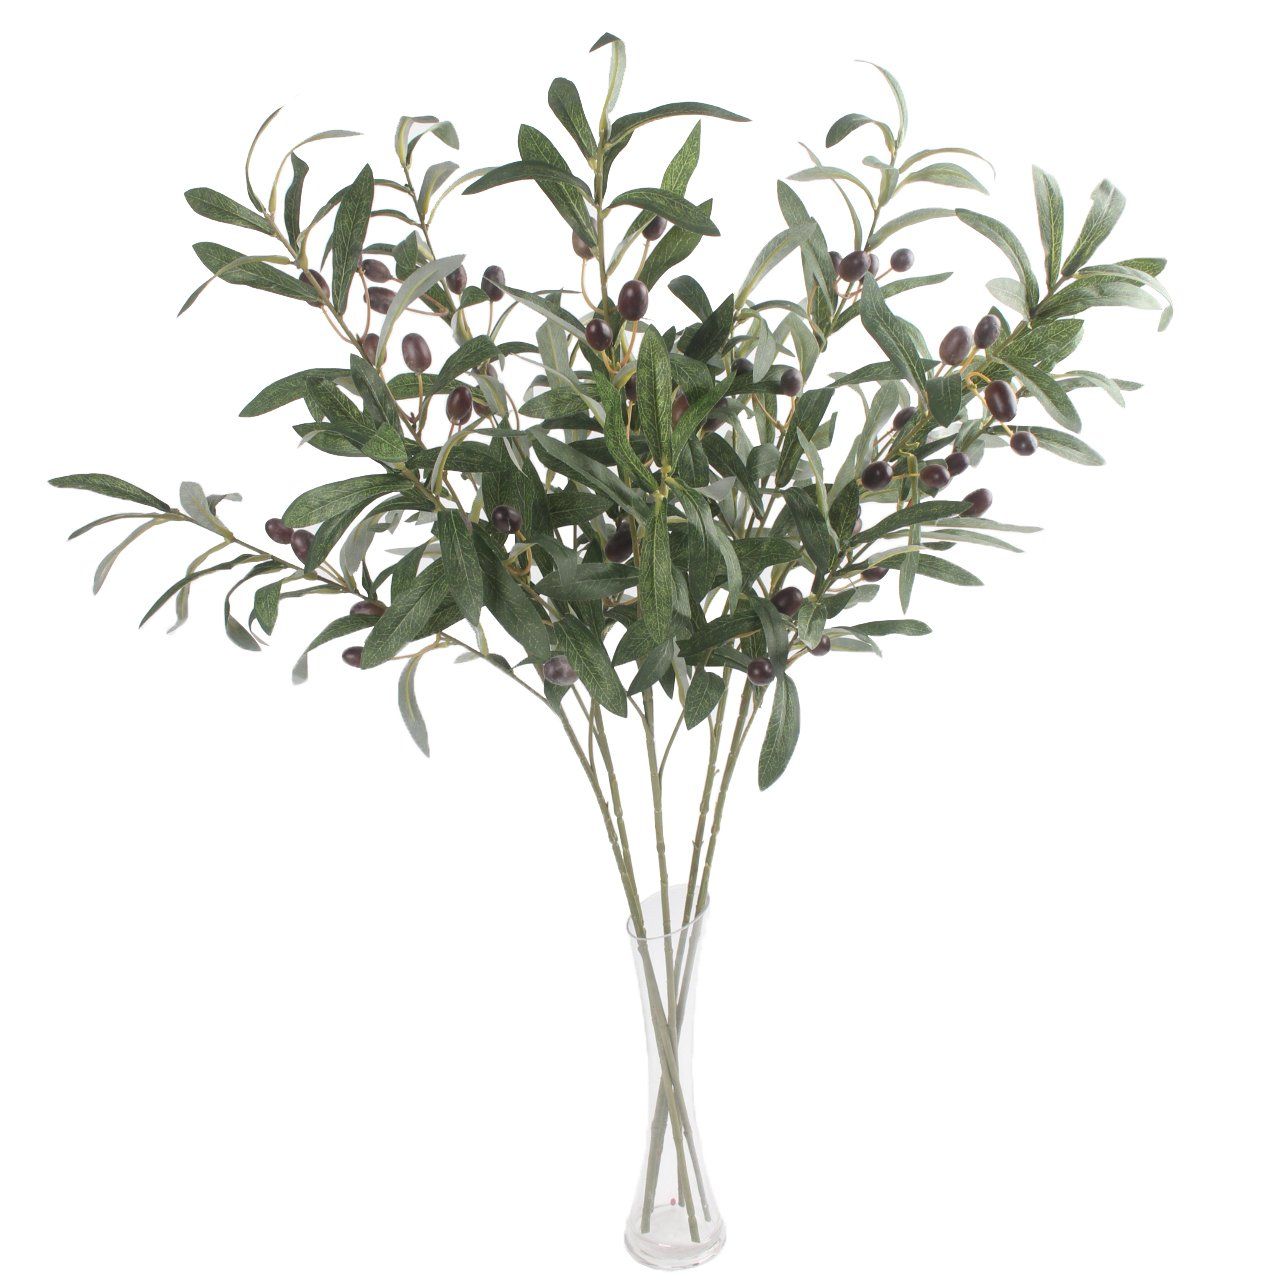 Artificial Olive Branch Stems 5pcs 28 Inch | Amazon (US)